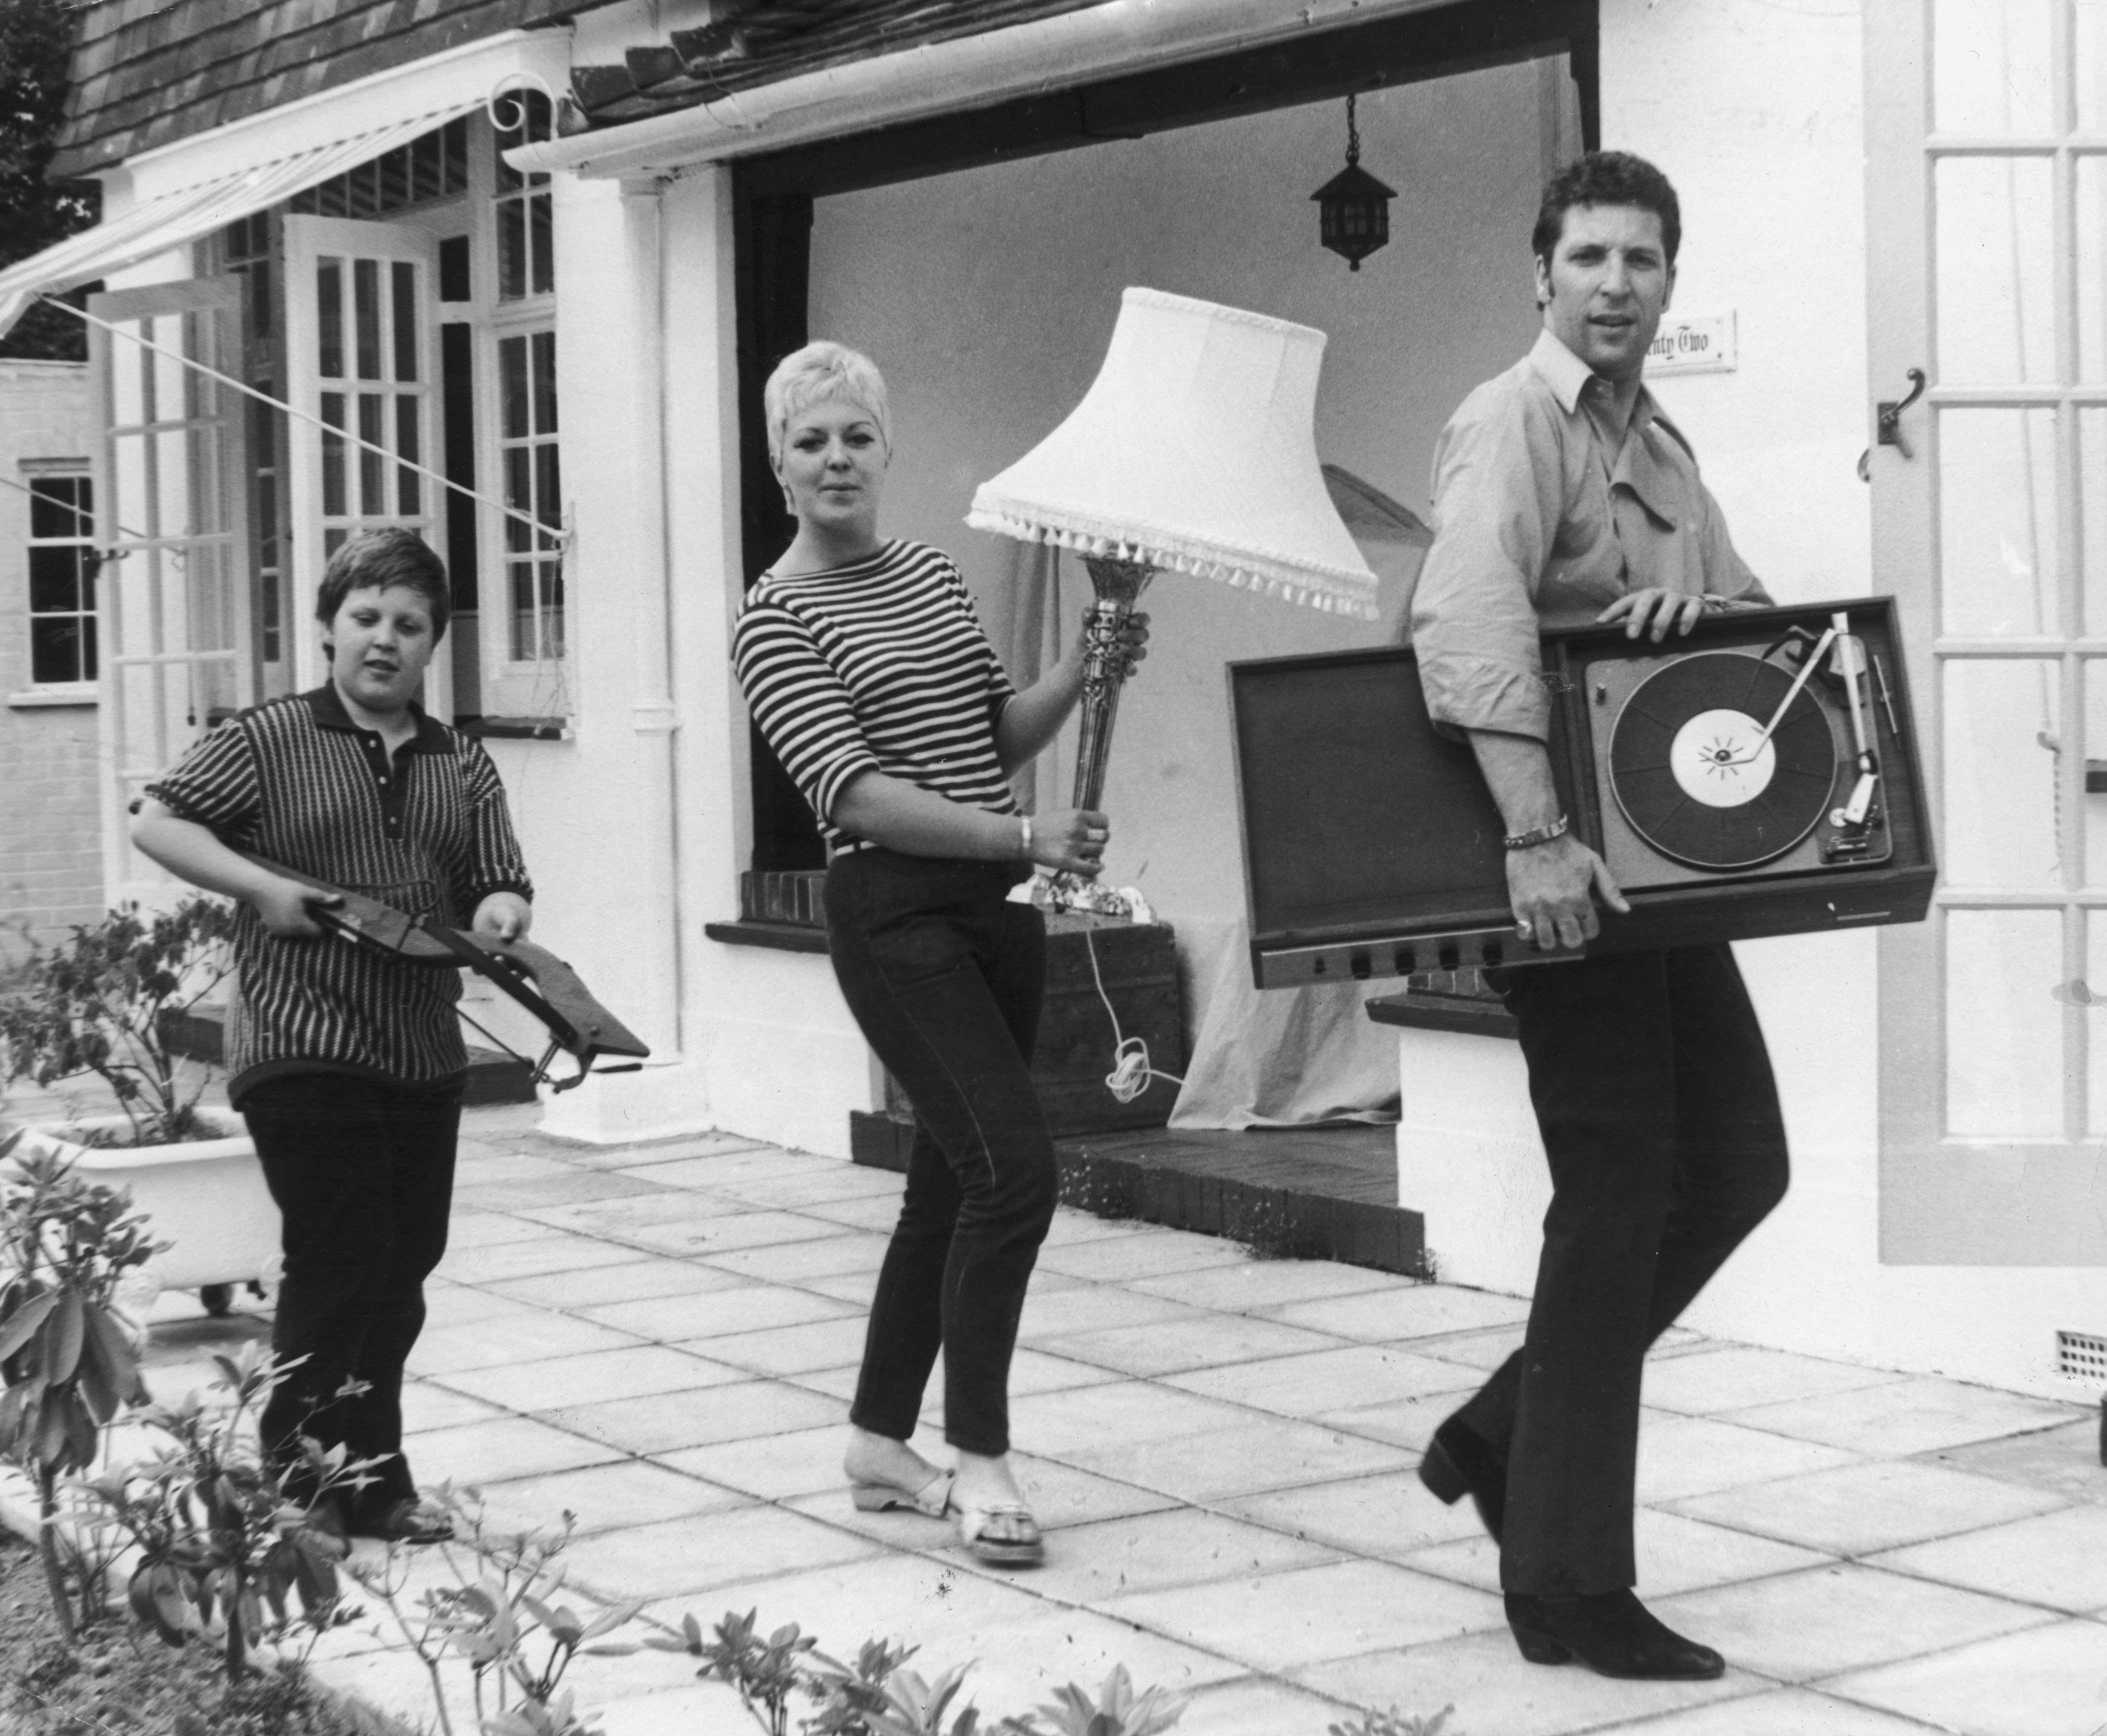 Tom Jones, Linda Trenchard, and Mark Woodward moving into their new home Sunbury in Surrey, July 21, 1967 | Source: Getty Images